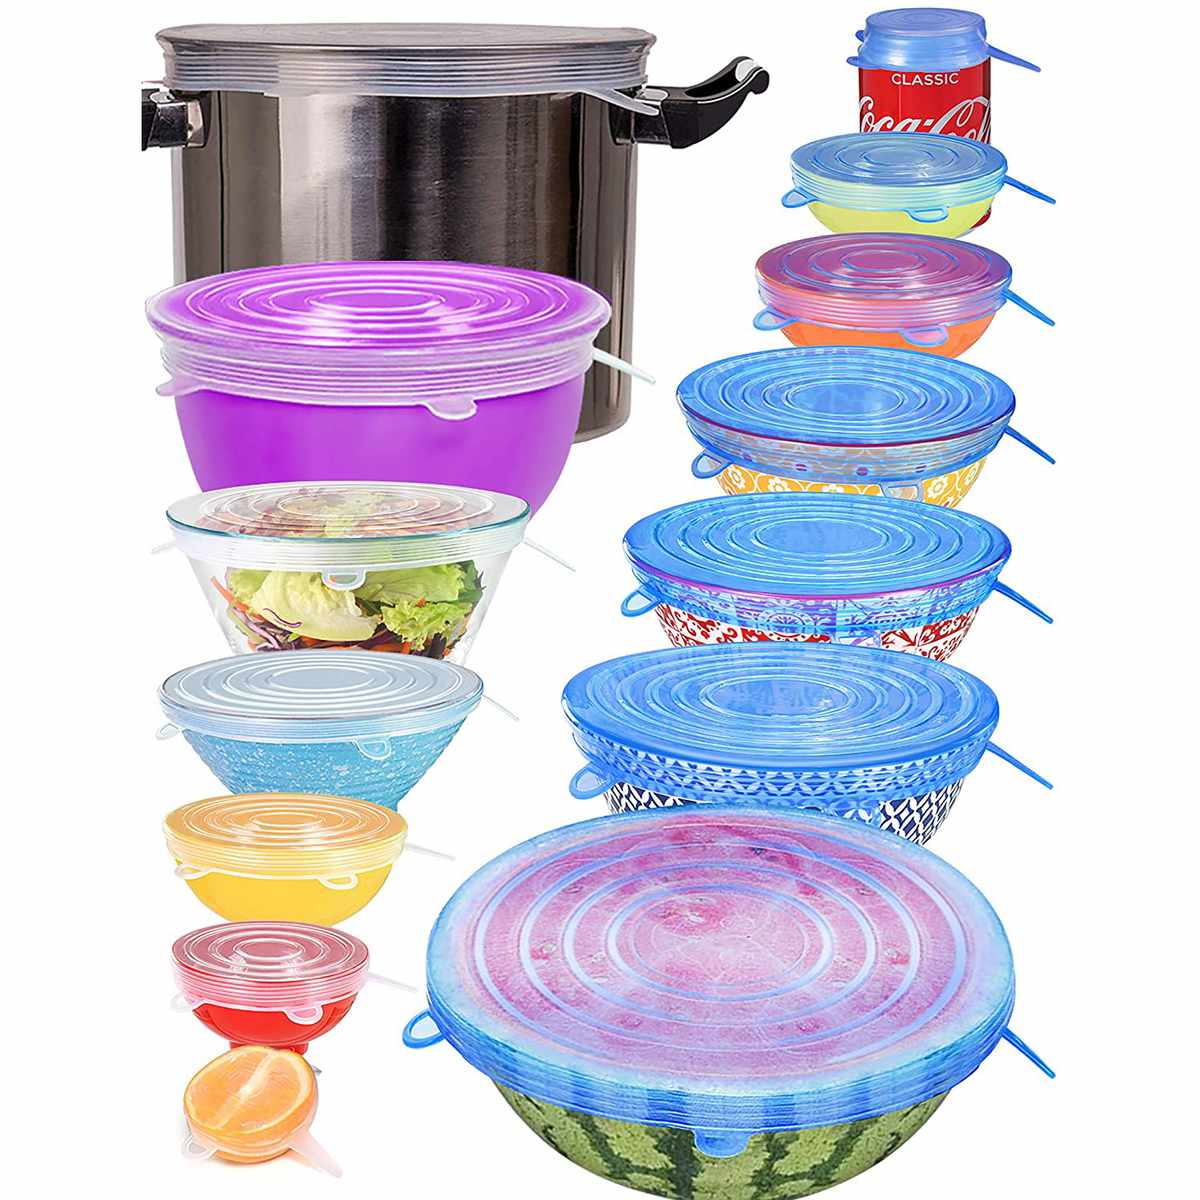 Stretch Reusable Silicone Bowl Food Storage Wraps Cover Seal Fresh Lids Clear 